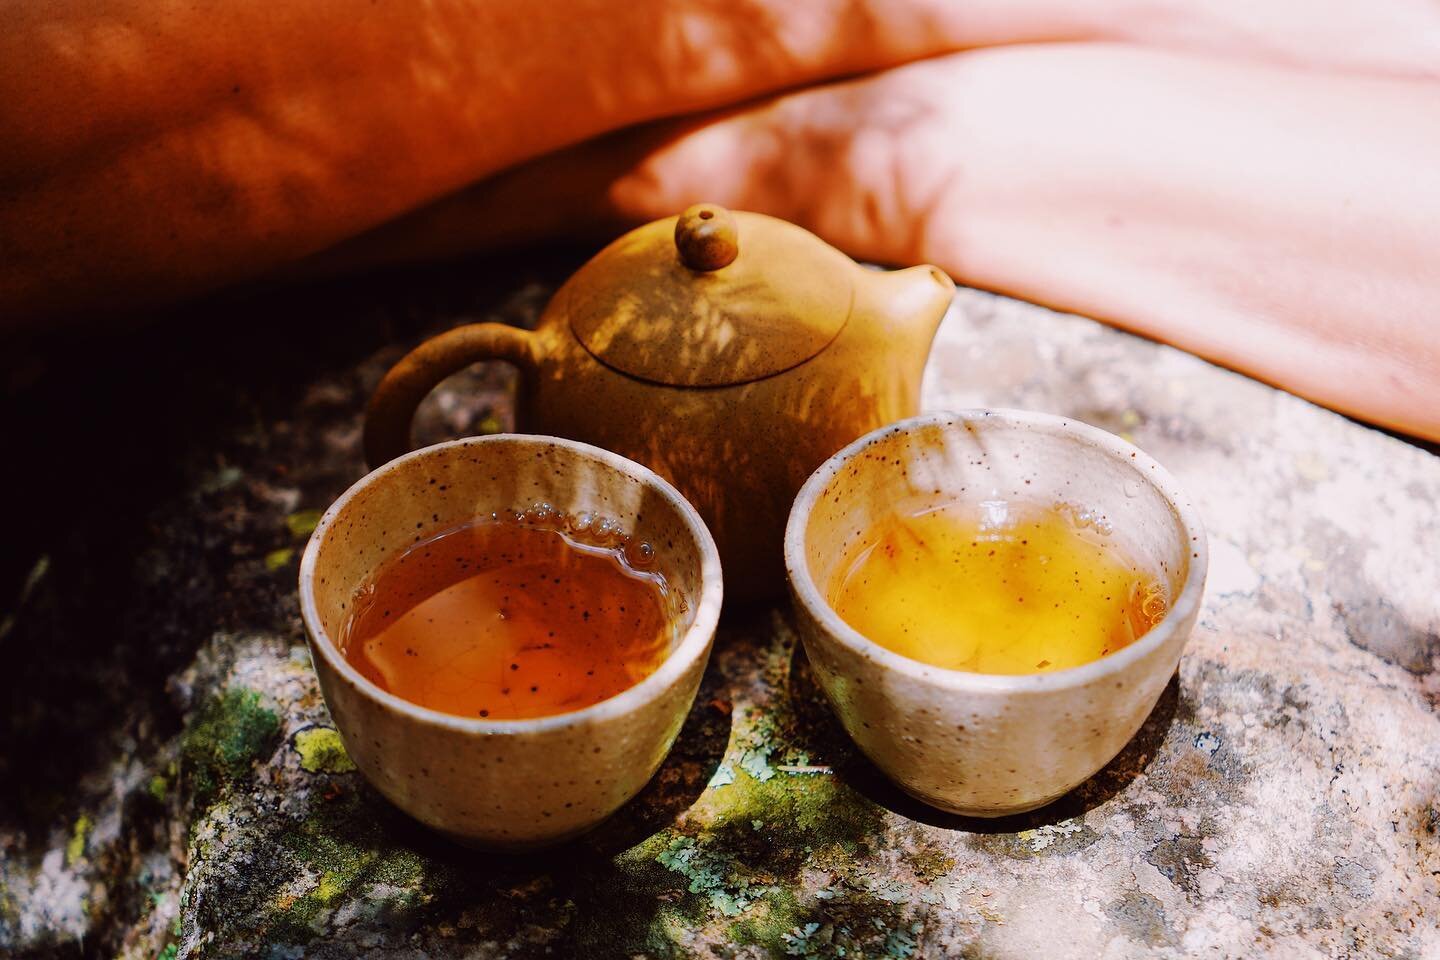 In this cup of tea, infuse the fleeting world, transiting from moment to moment. In the fullness of presence, we can see the unceasing dance of the many phases of consciousness : Water, Wood, Fire, Earth, Metal. *
.
In this cup of tea, we can see our